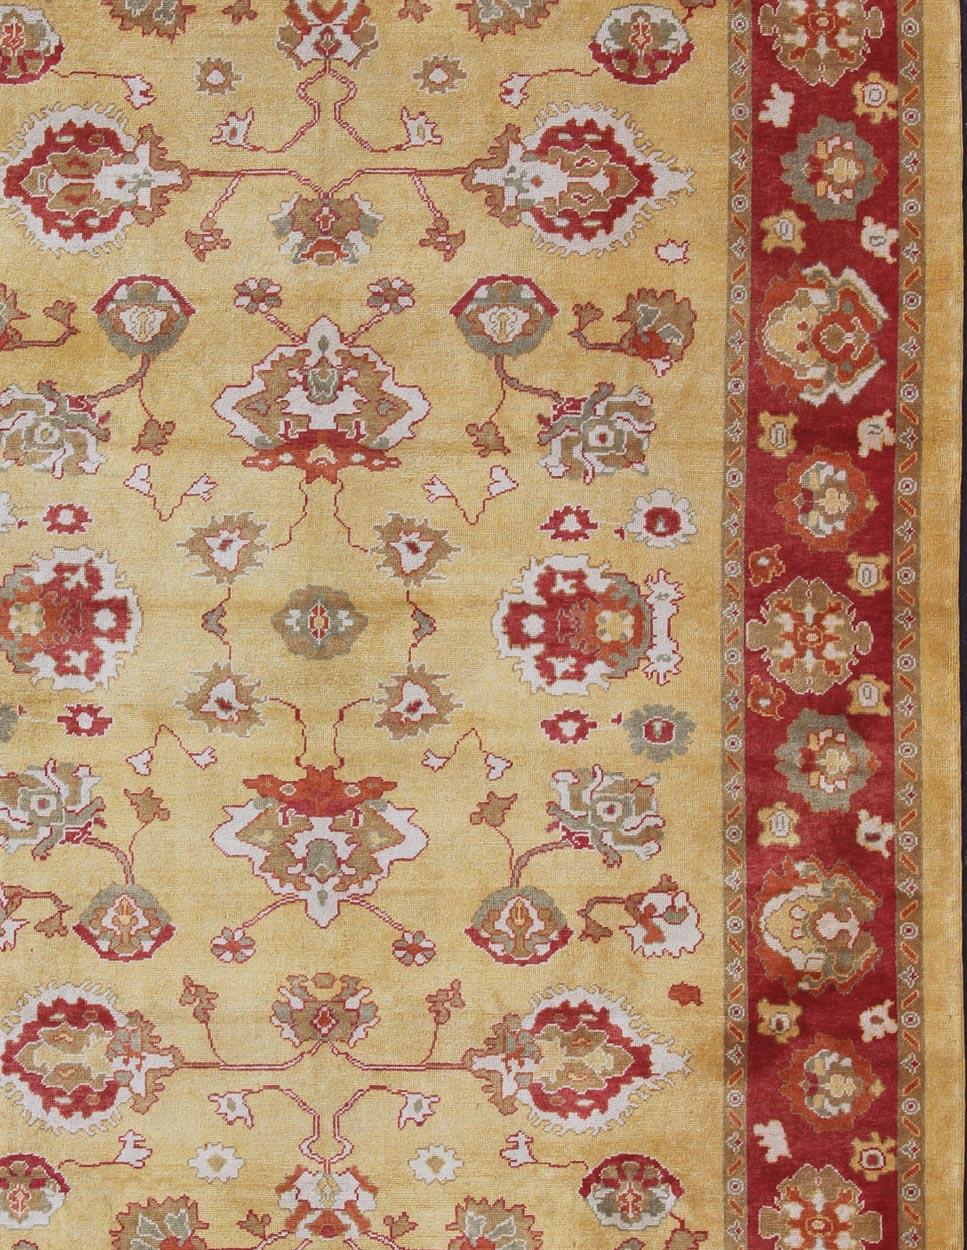 Turkish Oushak Rug, rug EN-340, country of origin / type: Turkey / Oushak.

Measures: 10'10 x 15'.

This traditional Oushak rug from Turkey features a subdued, neutral color palette and an all-over design of floral shapes, surrounded beautifully by